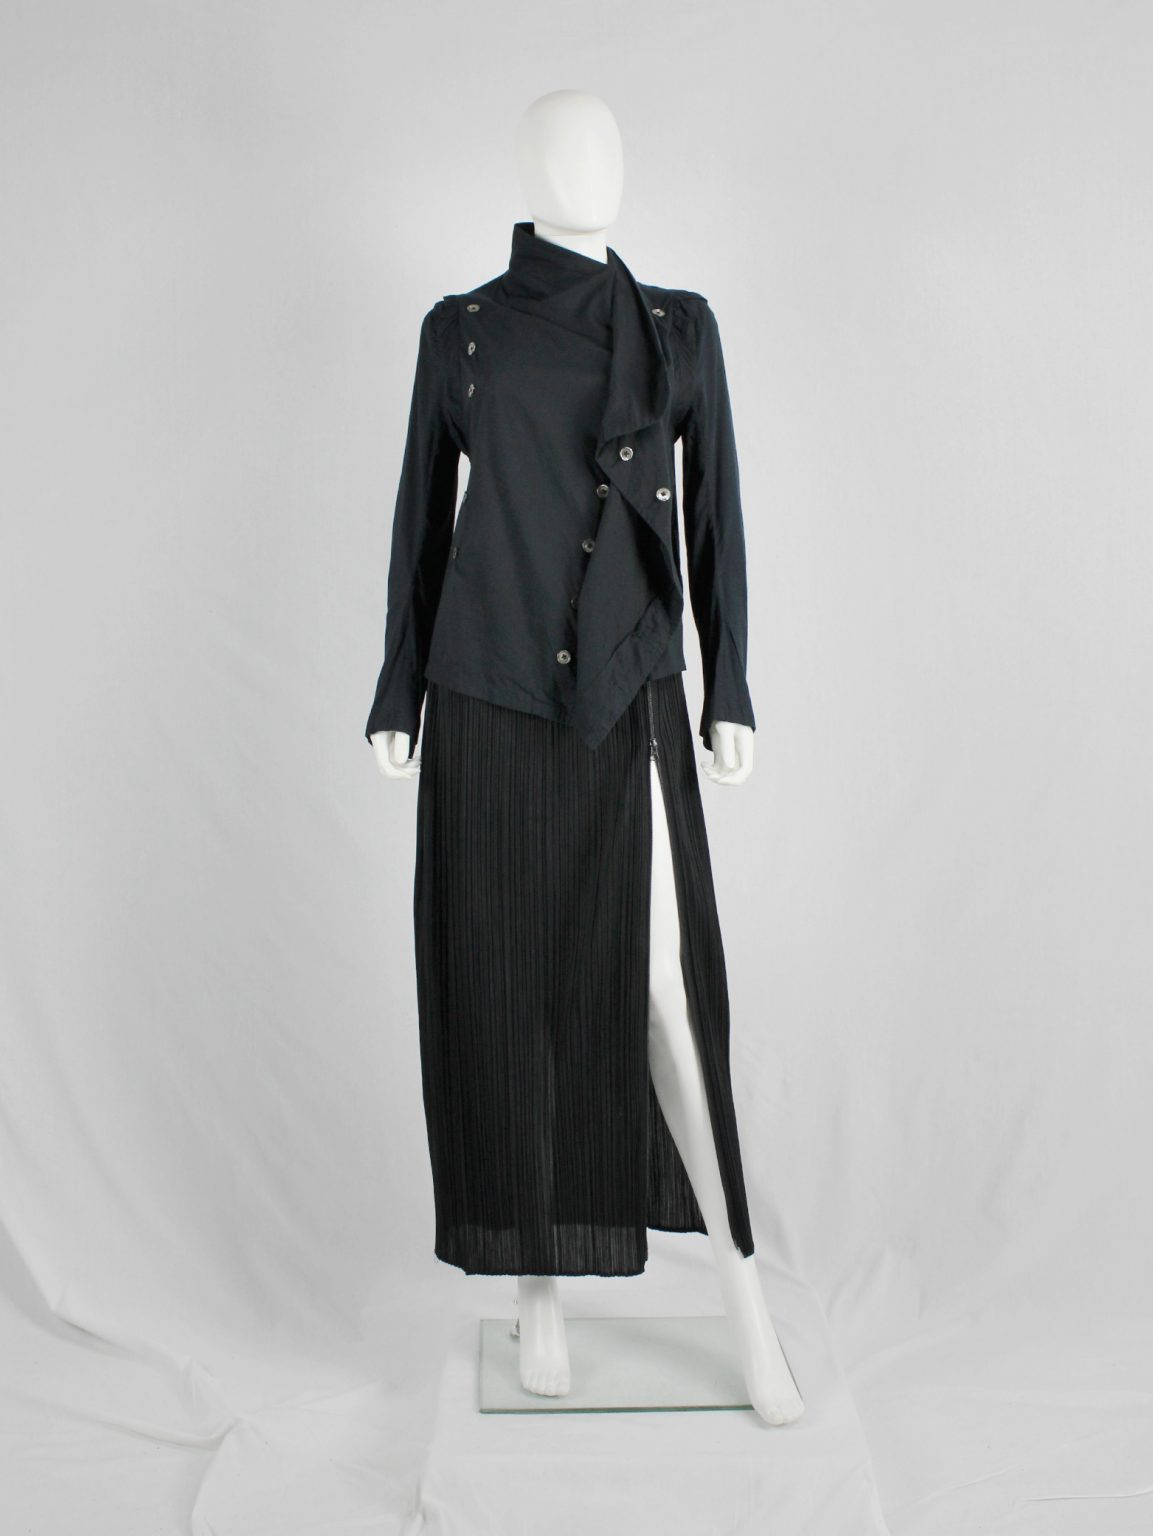 Ann Demeulemeester black shirt with standing neckline and a double row of buttons